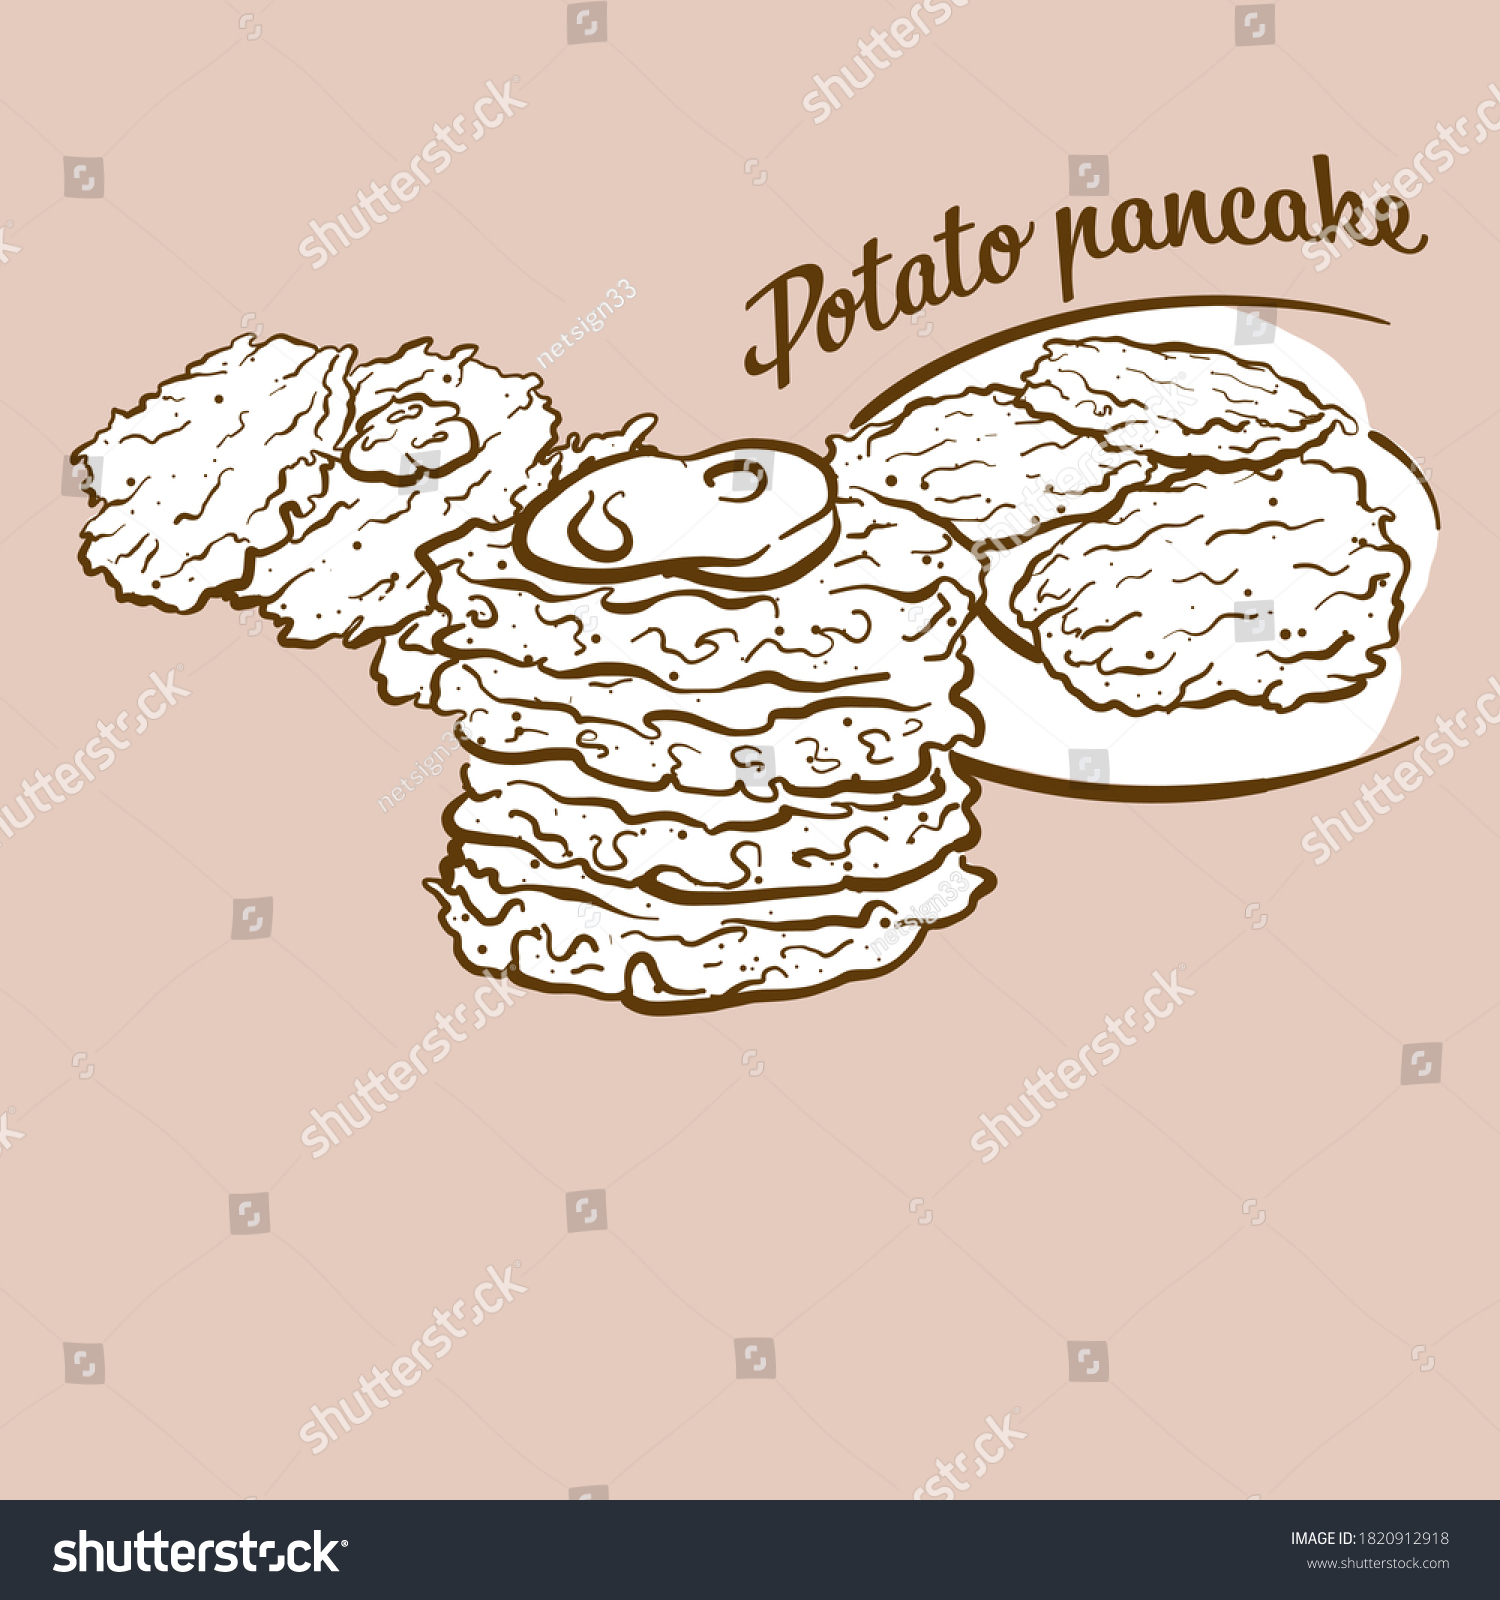 SVG of Hand-drawn Potato pancake bread illustration. Pancake, usually known in Slovakia, Germany. Vector drawing series. svg